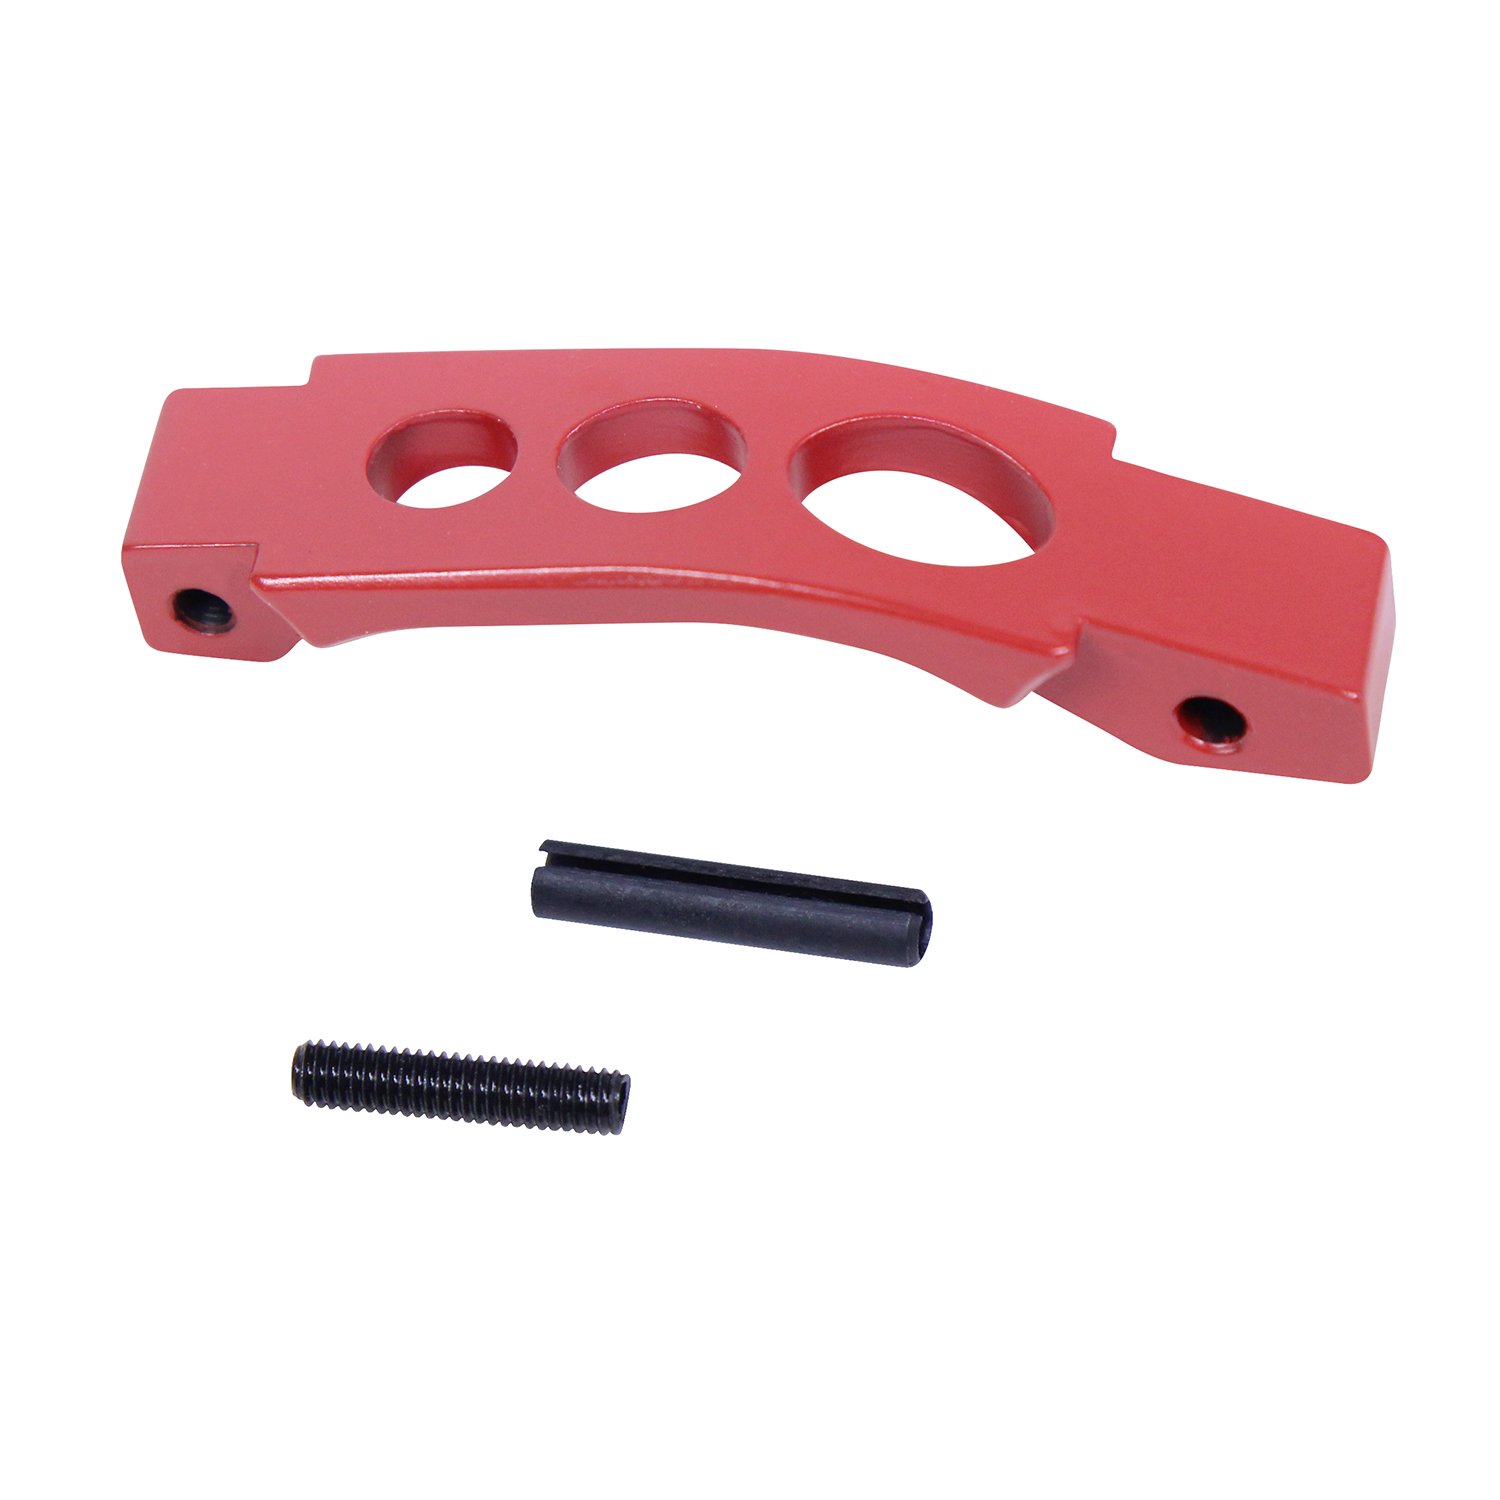 Red Cerakote AR-15 trigger guard with mounting hardware by Guntec USA.